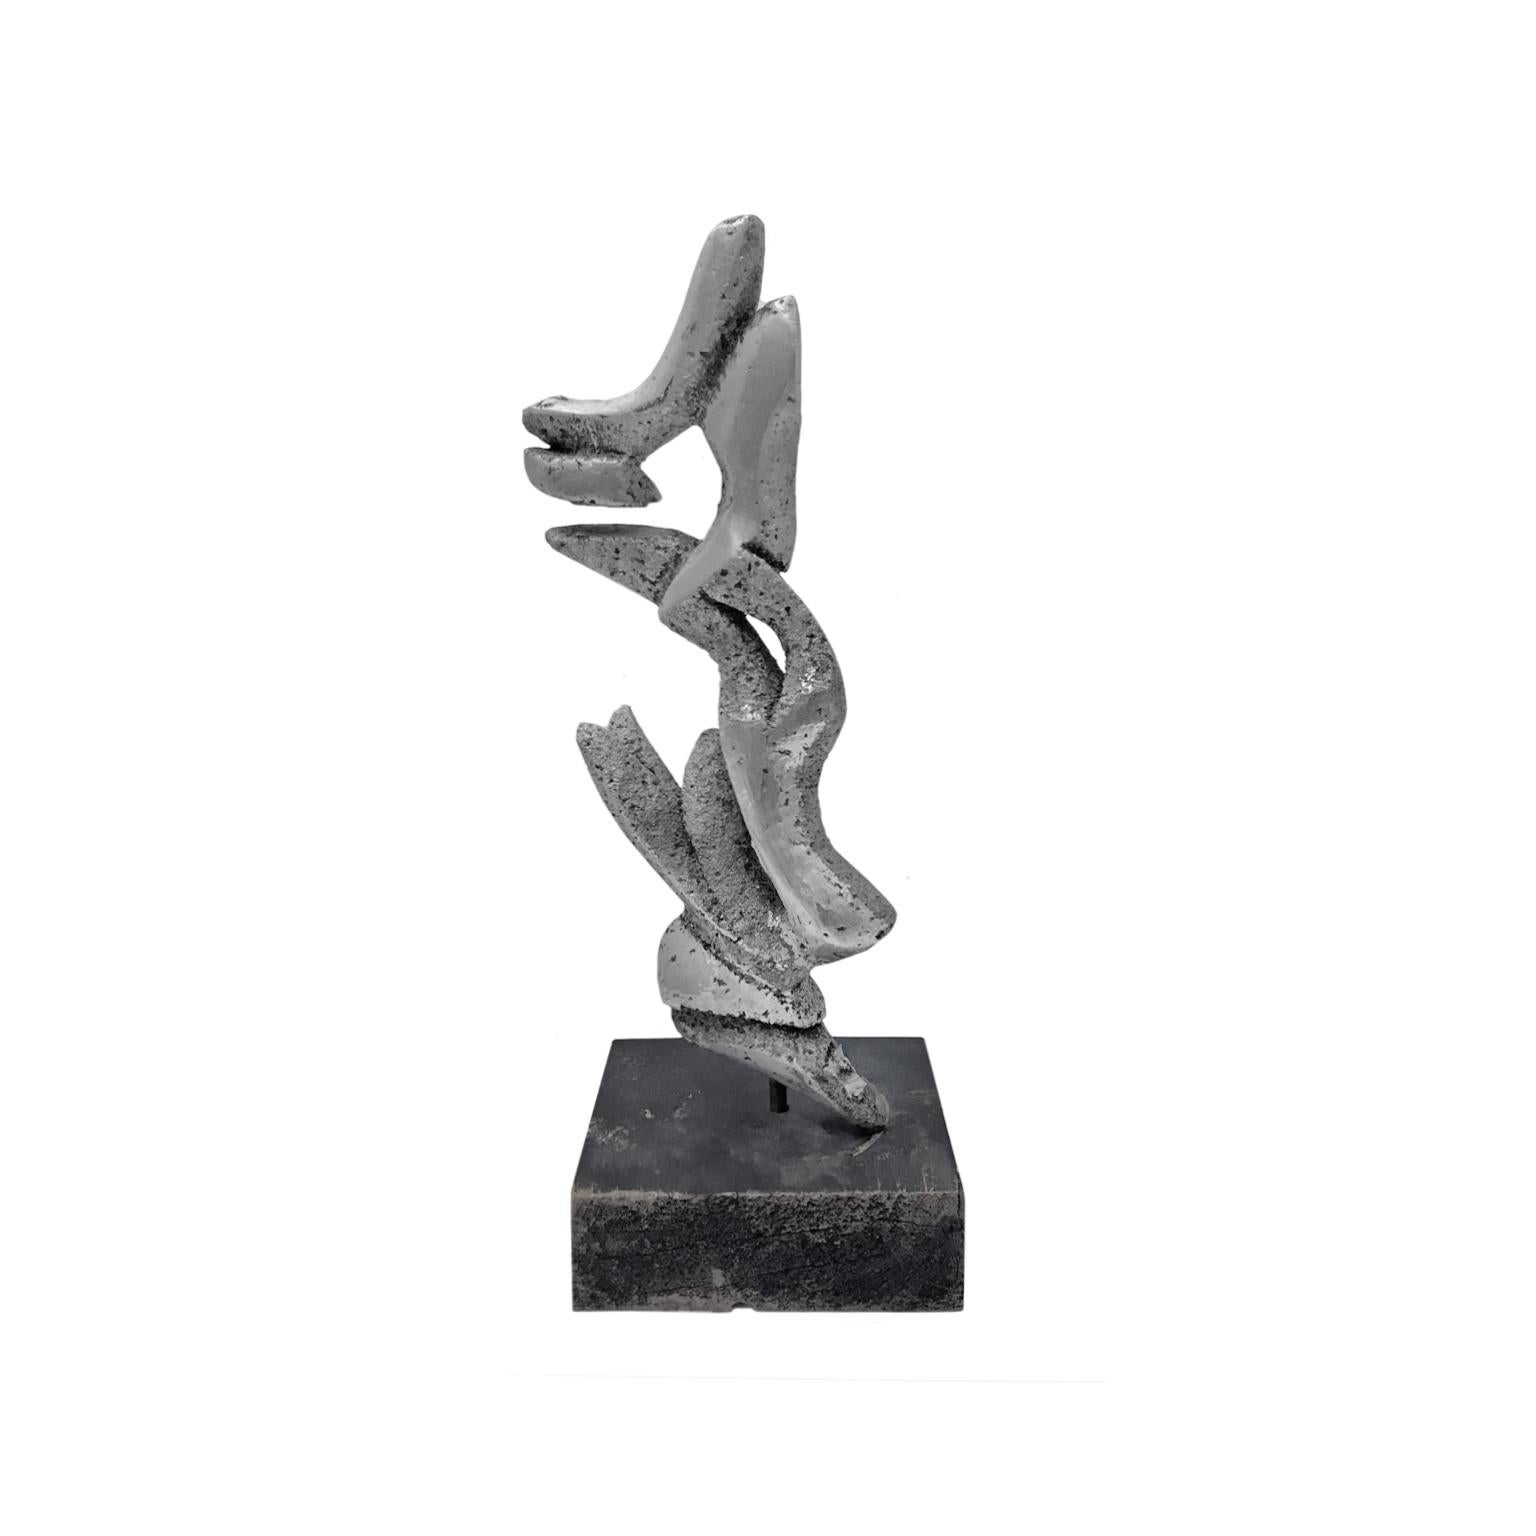 American 1970s Abstract Aluminum Sculpture on Wood Base by Lucy Baker